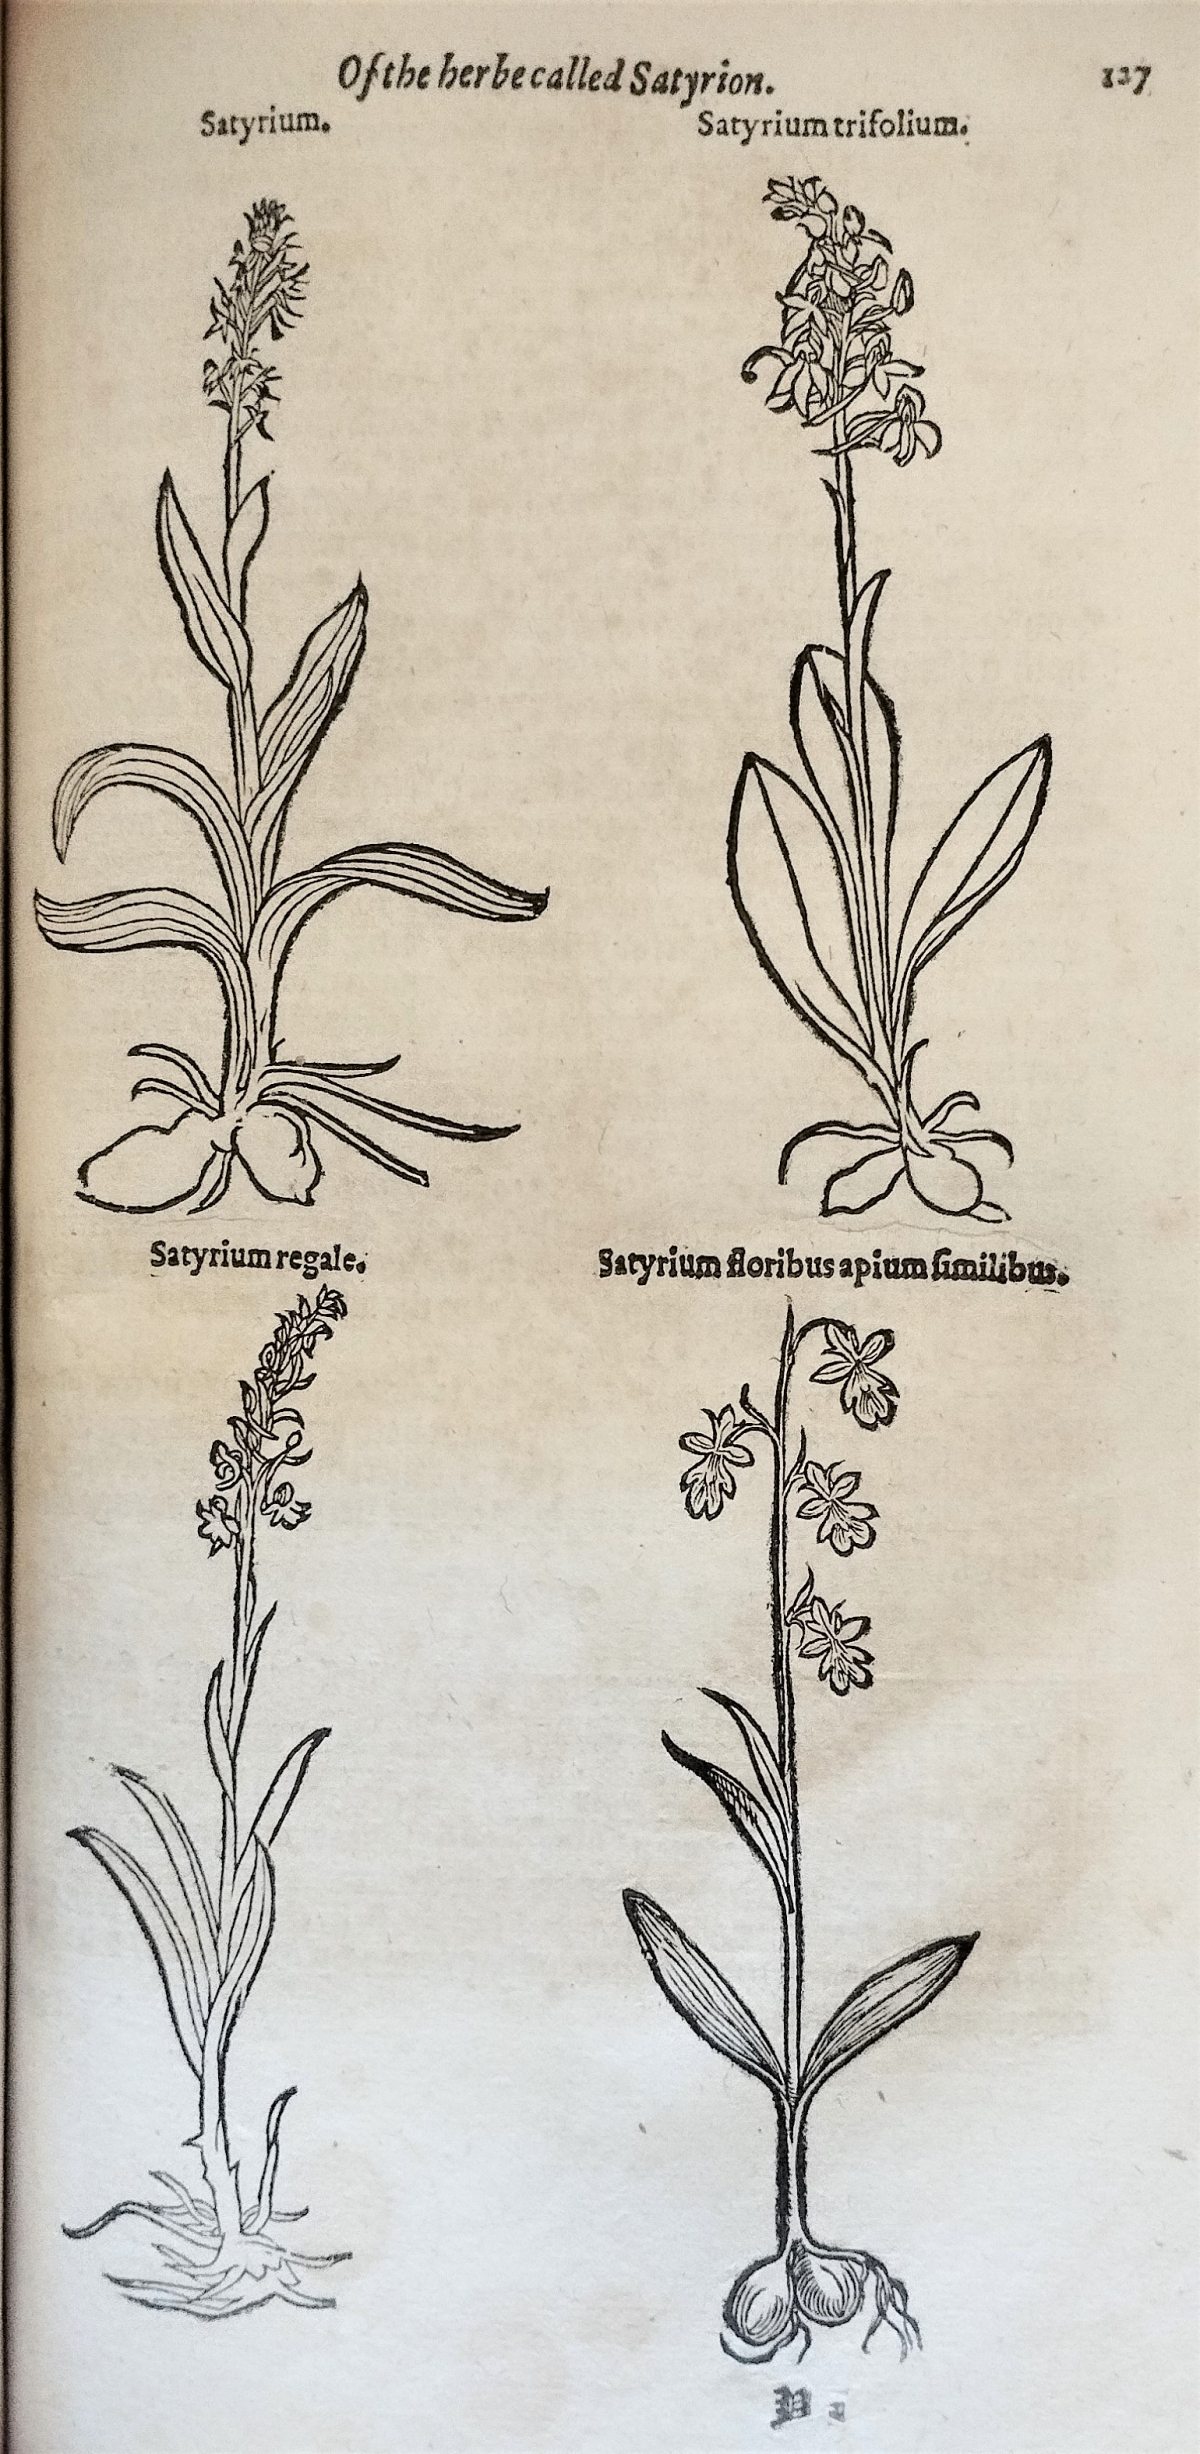 Page with four woodcuts illustrations of the satyrium orchid. 